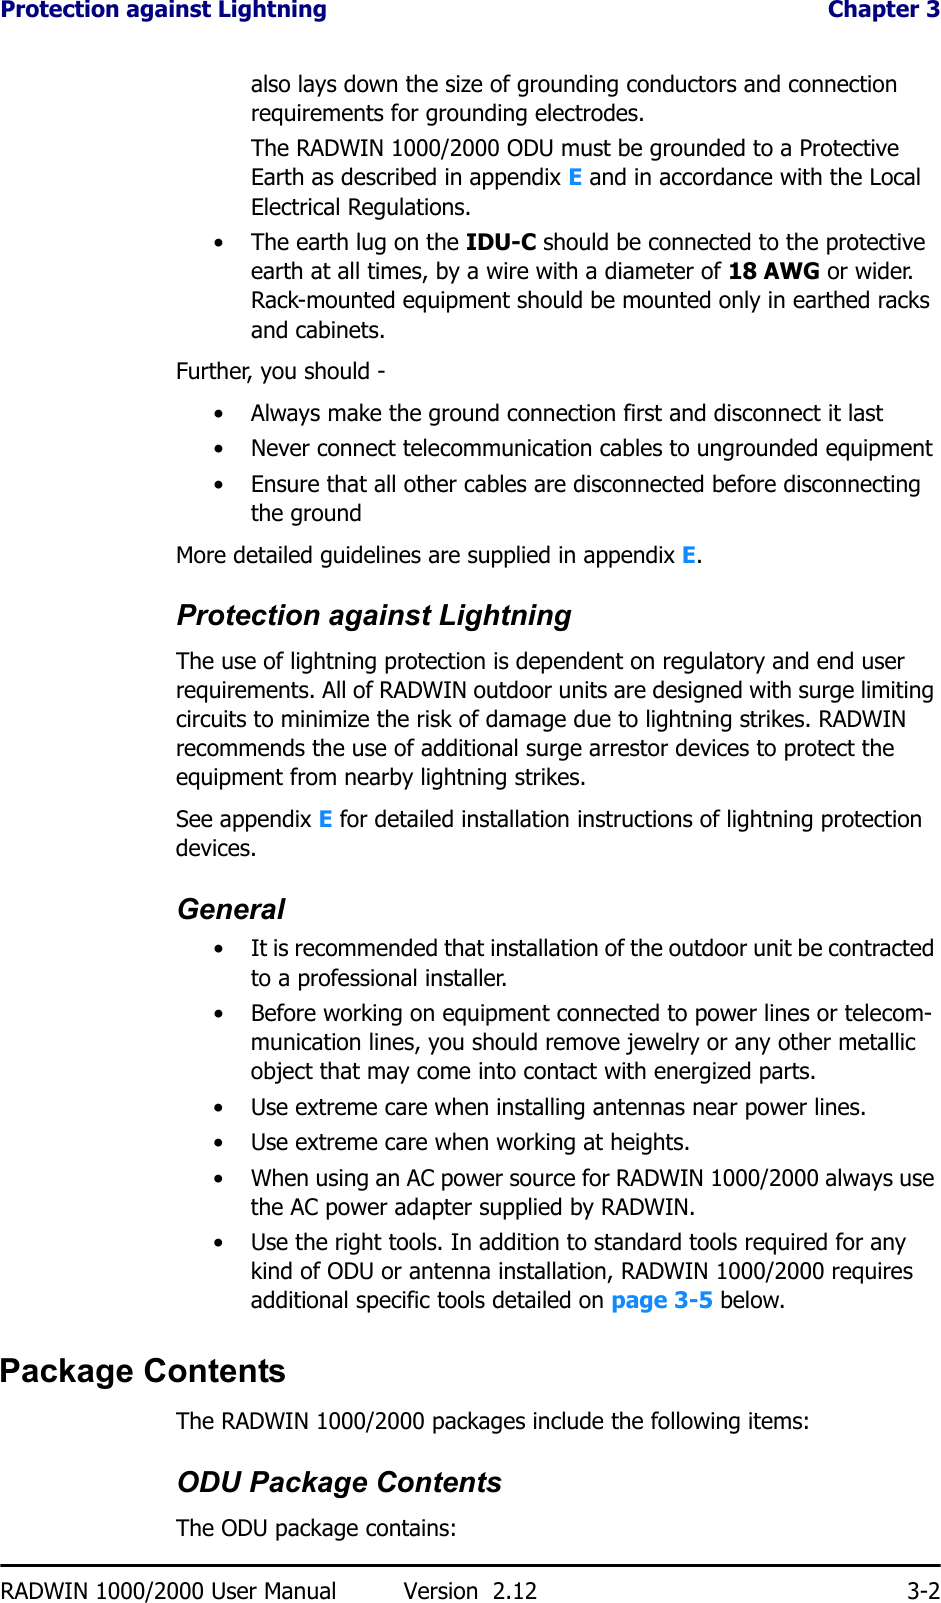 Protection against Lightning  Chapter 3RADWIN 1000/2000 User Manual Version  2.12 3-2also lays down the size of grounding conductors and connection requirements for grounding electrodes.The RADWIN 1000/2000 ODU must be grounded to a Protective Earth as described in appendix E and in accordance with the Local Electrical Regulations.• The earth lug on the IDU-C should be connected to the protective earth at all times, by a wire with a diameter of 18 AWG or wider. Rack-mounted equipment should be mounted only in earthed racks and cabinets.Further, you should -• Always make the ground connection first and disconnect it last• Never connect telecommunication cables to ungrounded equipment• Ensure that all other cables are disconnected before disconnecting the groundMore detailed guidelines are supplied in appendix E.Protection against LightningThe use of lightning protection is dependent on regulatory and end user requirements. All of RADWIN outdoor units are designed with surge limiting circuits to minimize the risk of damage due to lightning strikes. RADWIN recommends the use of additional surge arrestor devices to protect the equipment from nearby lightning strikes.See appendix E for detailed installation instructions of lightning protection devices.General• It is recommended that installation of the outdoor unit be contracted to a professional installer.• Before working on equipment connected to power lines or telecom-munication lines, you should remove jewelry or any other metallic object that may come into contact with energized parts.• Use extreme care when installing antennas near power lines.• Use extreme care when working at heights.• When using an AC power source for RADWIN 1000/2000 always use the AC power adapter supplied by RADWIN.• Use the right tools. In addition to standard tools required for any kind of ODU or antenna installation, RADWIN 1000/2000 requires additional specific tools detailed on page 3-5 below.Package ContentsThe RADWIN 1000/2000 packages include the following items:ODU Package ContentsThe ODU package contains: